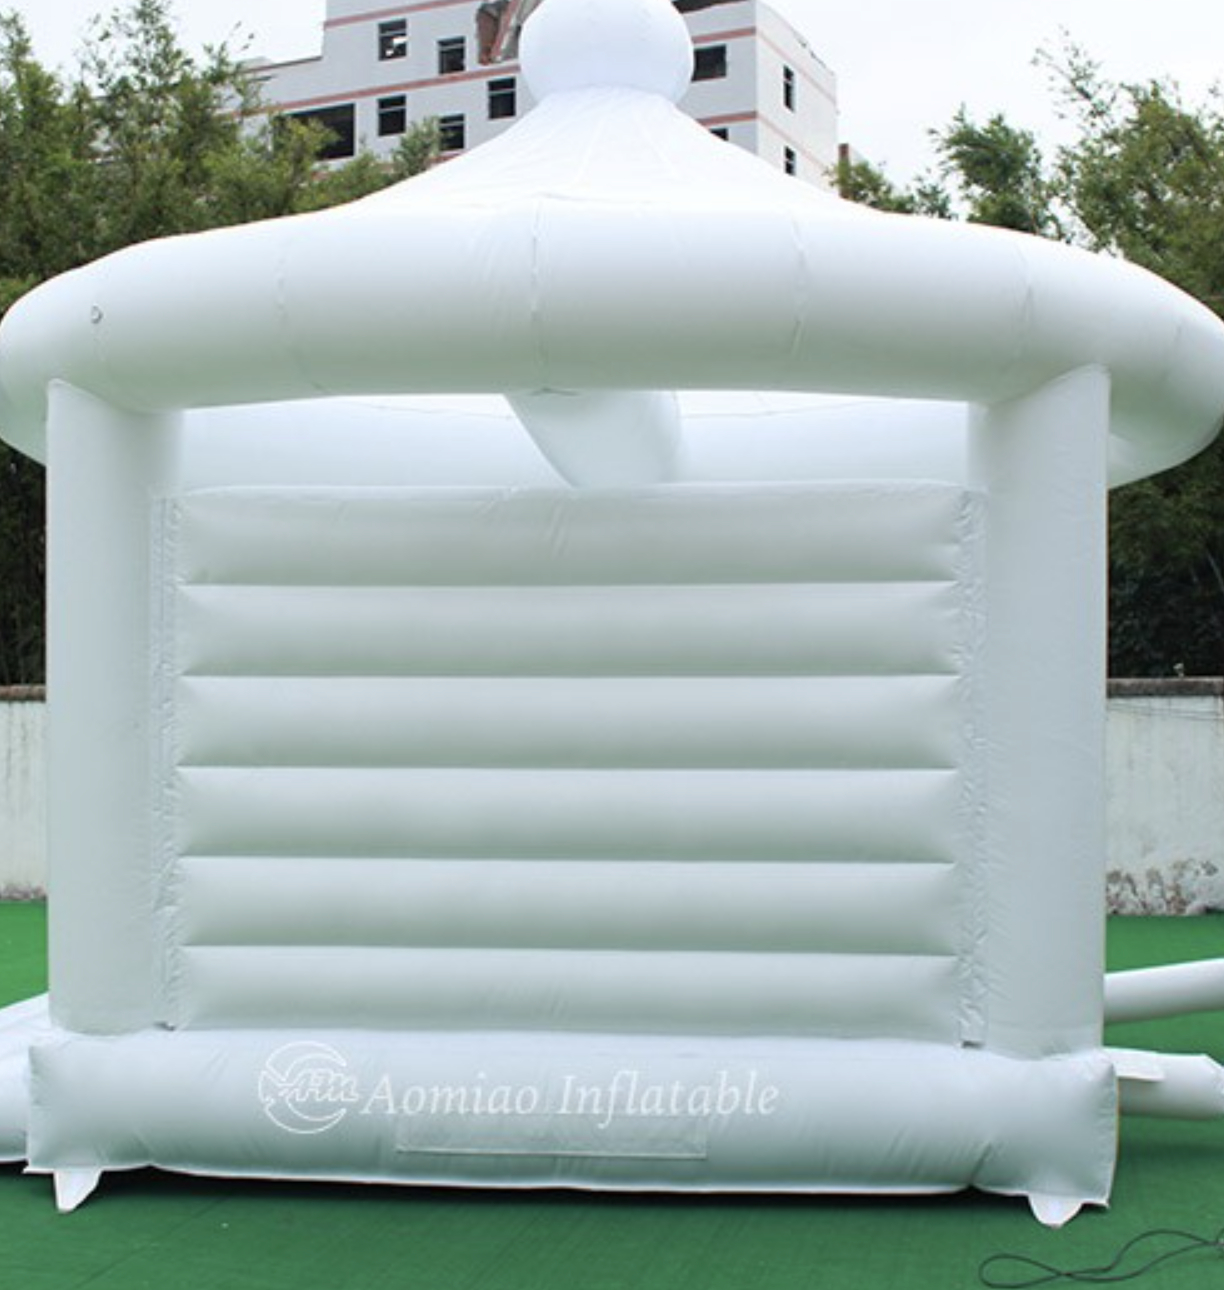 this image shows inflatable house in Roseville, CA